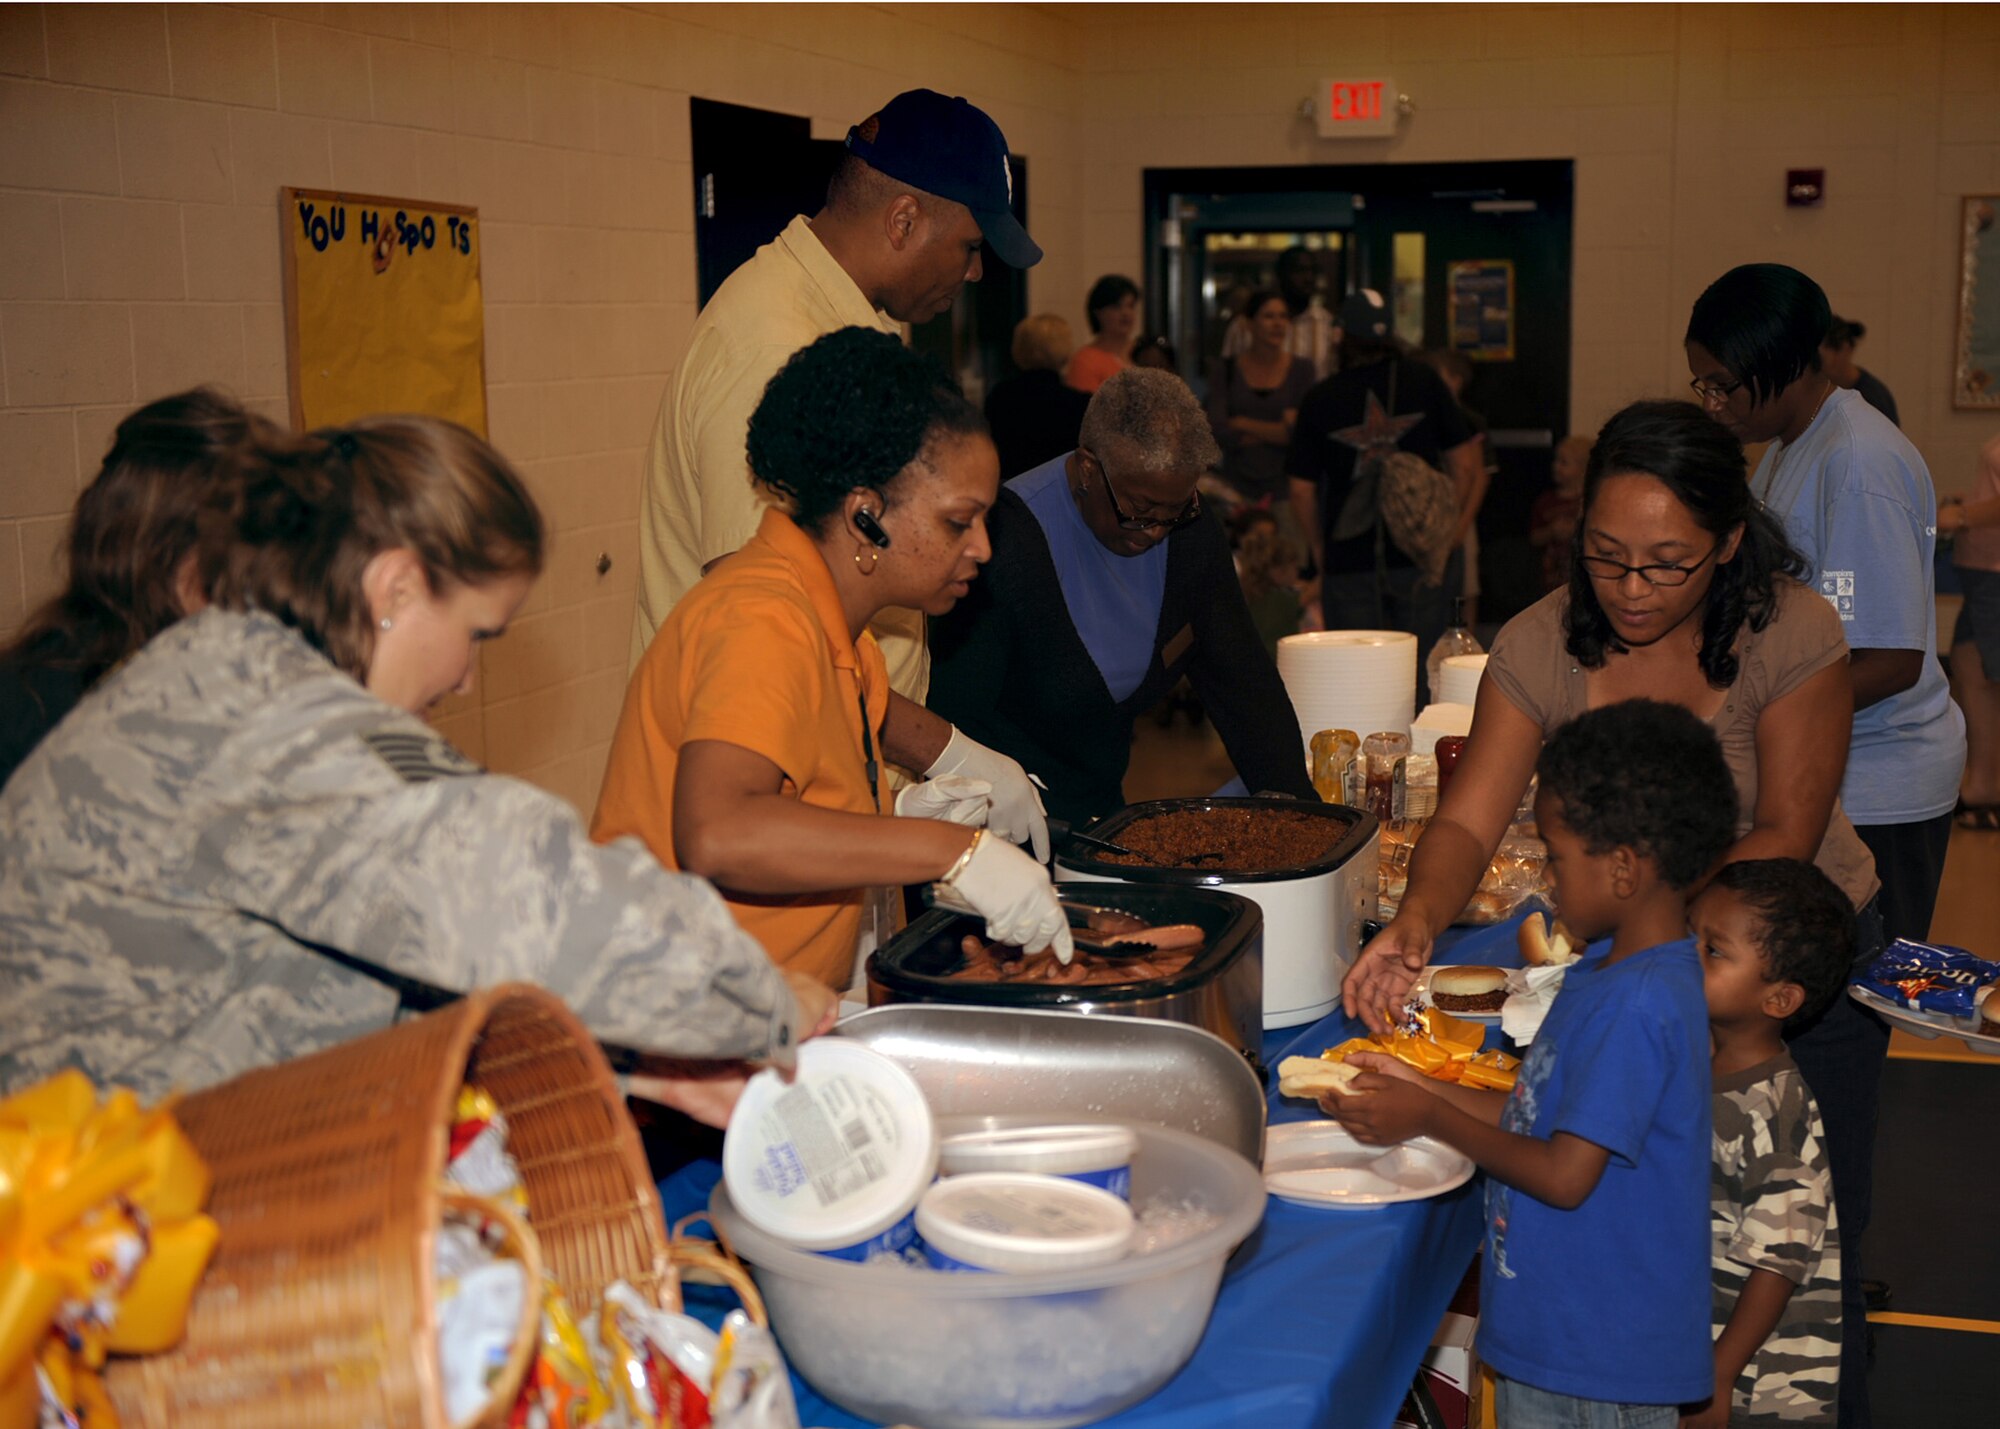 Members from the Airman and Family Readiness Center serve food during the Yellow Ribbon/Worldwide Day of Play event at the Youth Center on Seymour Johnson Air Force Base, N.C., Sept. 25, 2009. The AFRC hosted the quarterly event, the next is scheduled for this winter. (U.S. Air Force/Senior Airman Ciara Wymbs)